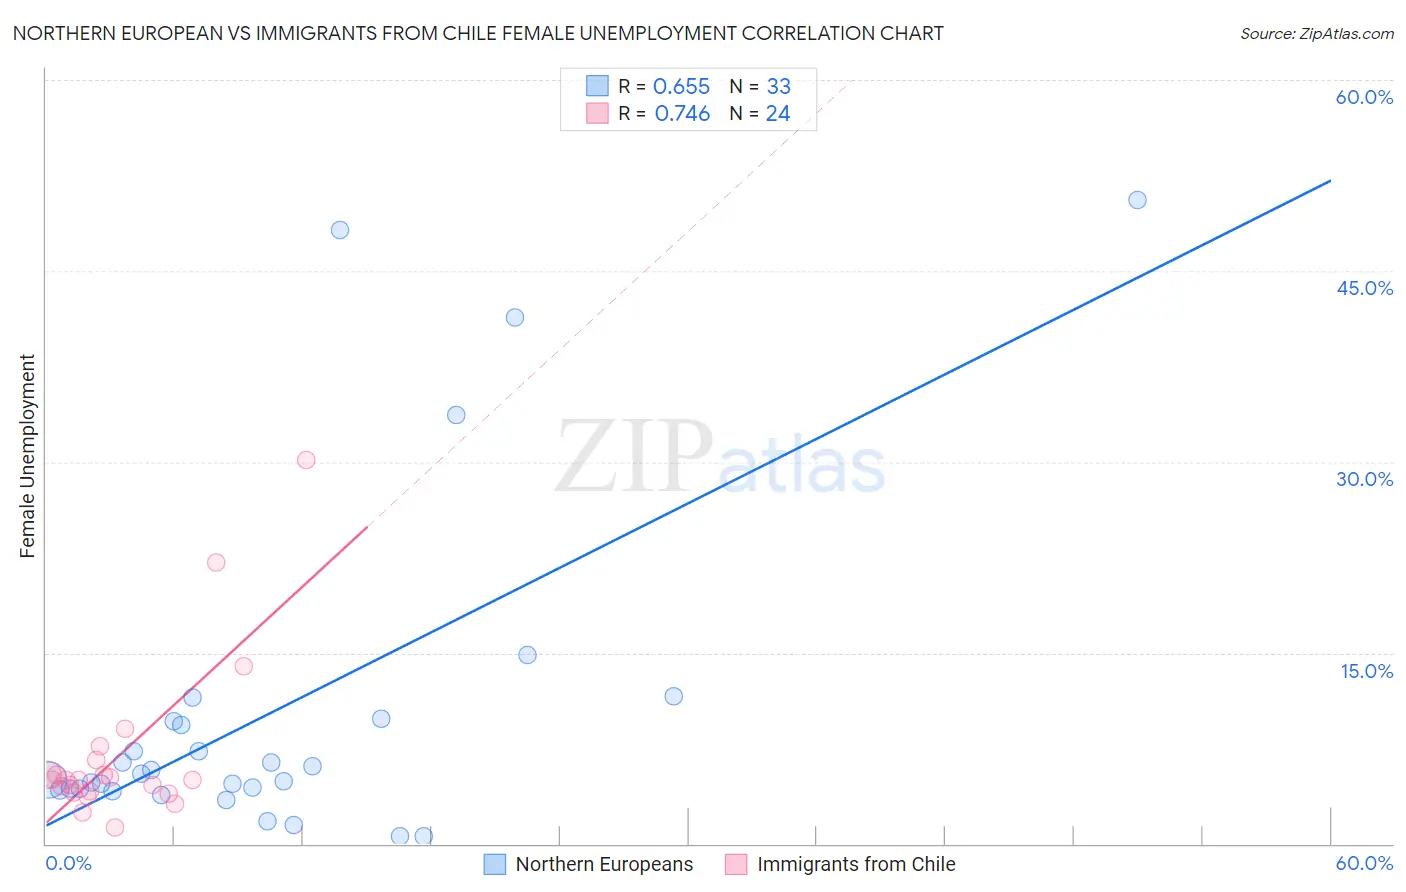 Northern European vs Immigrants from Chile Female Unemployment